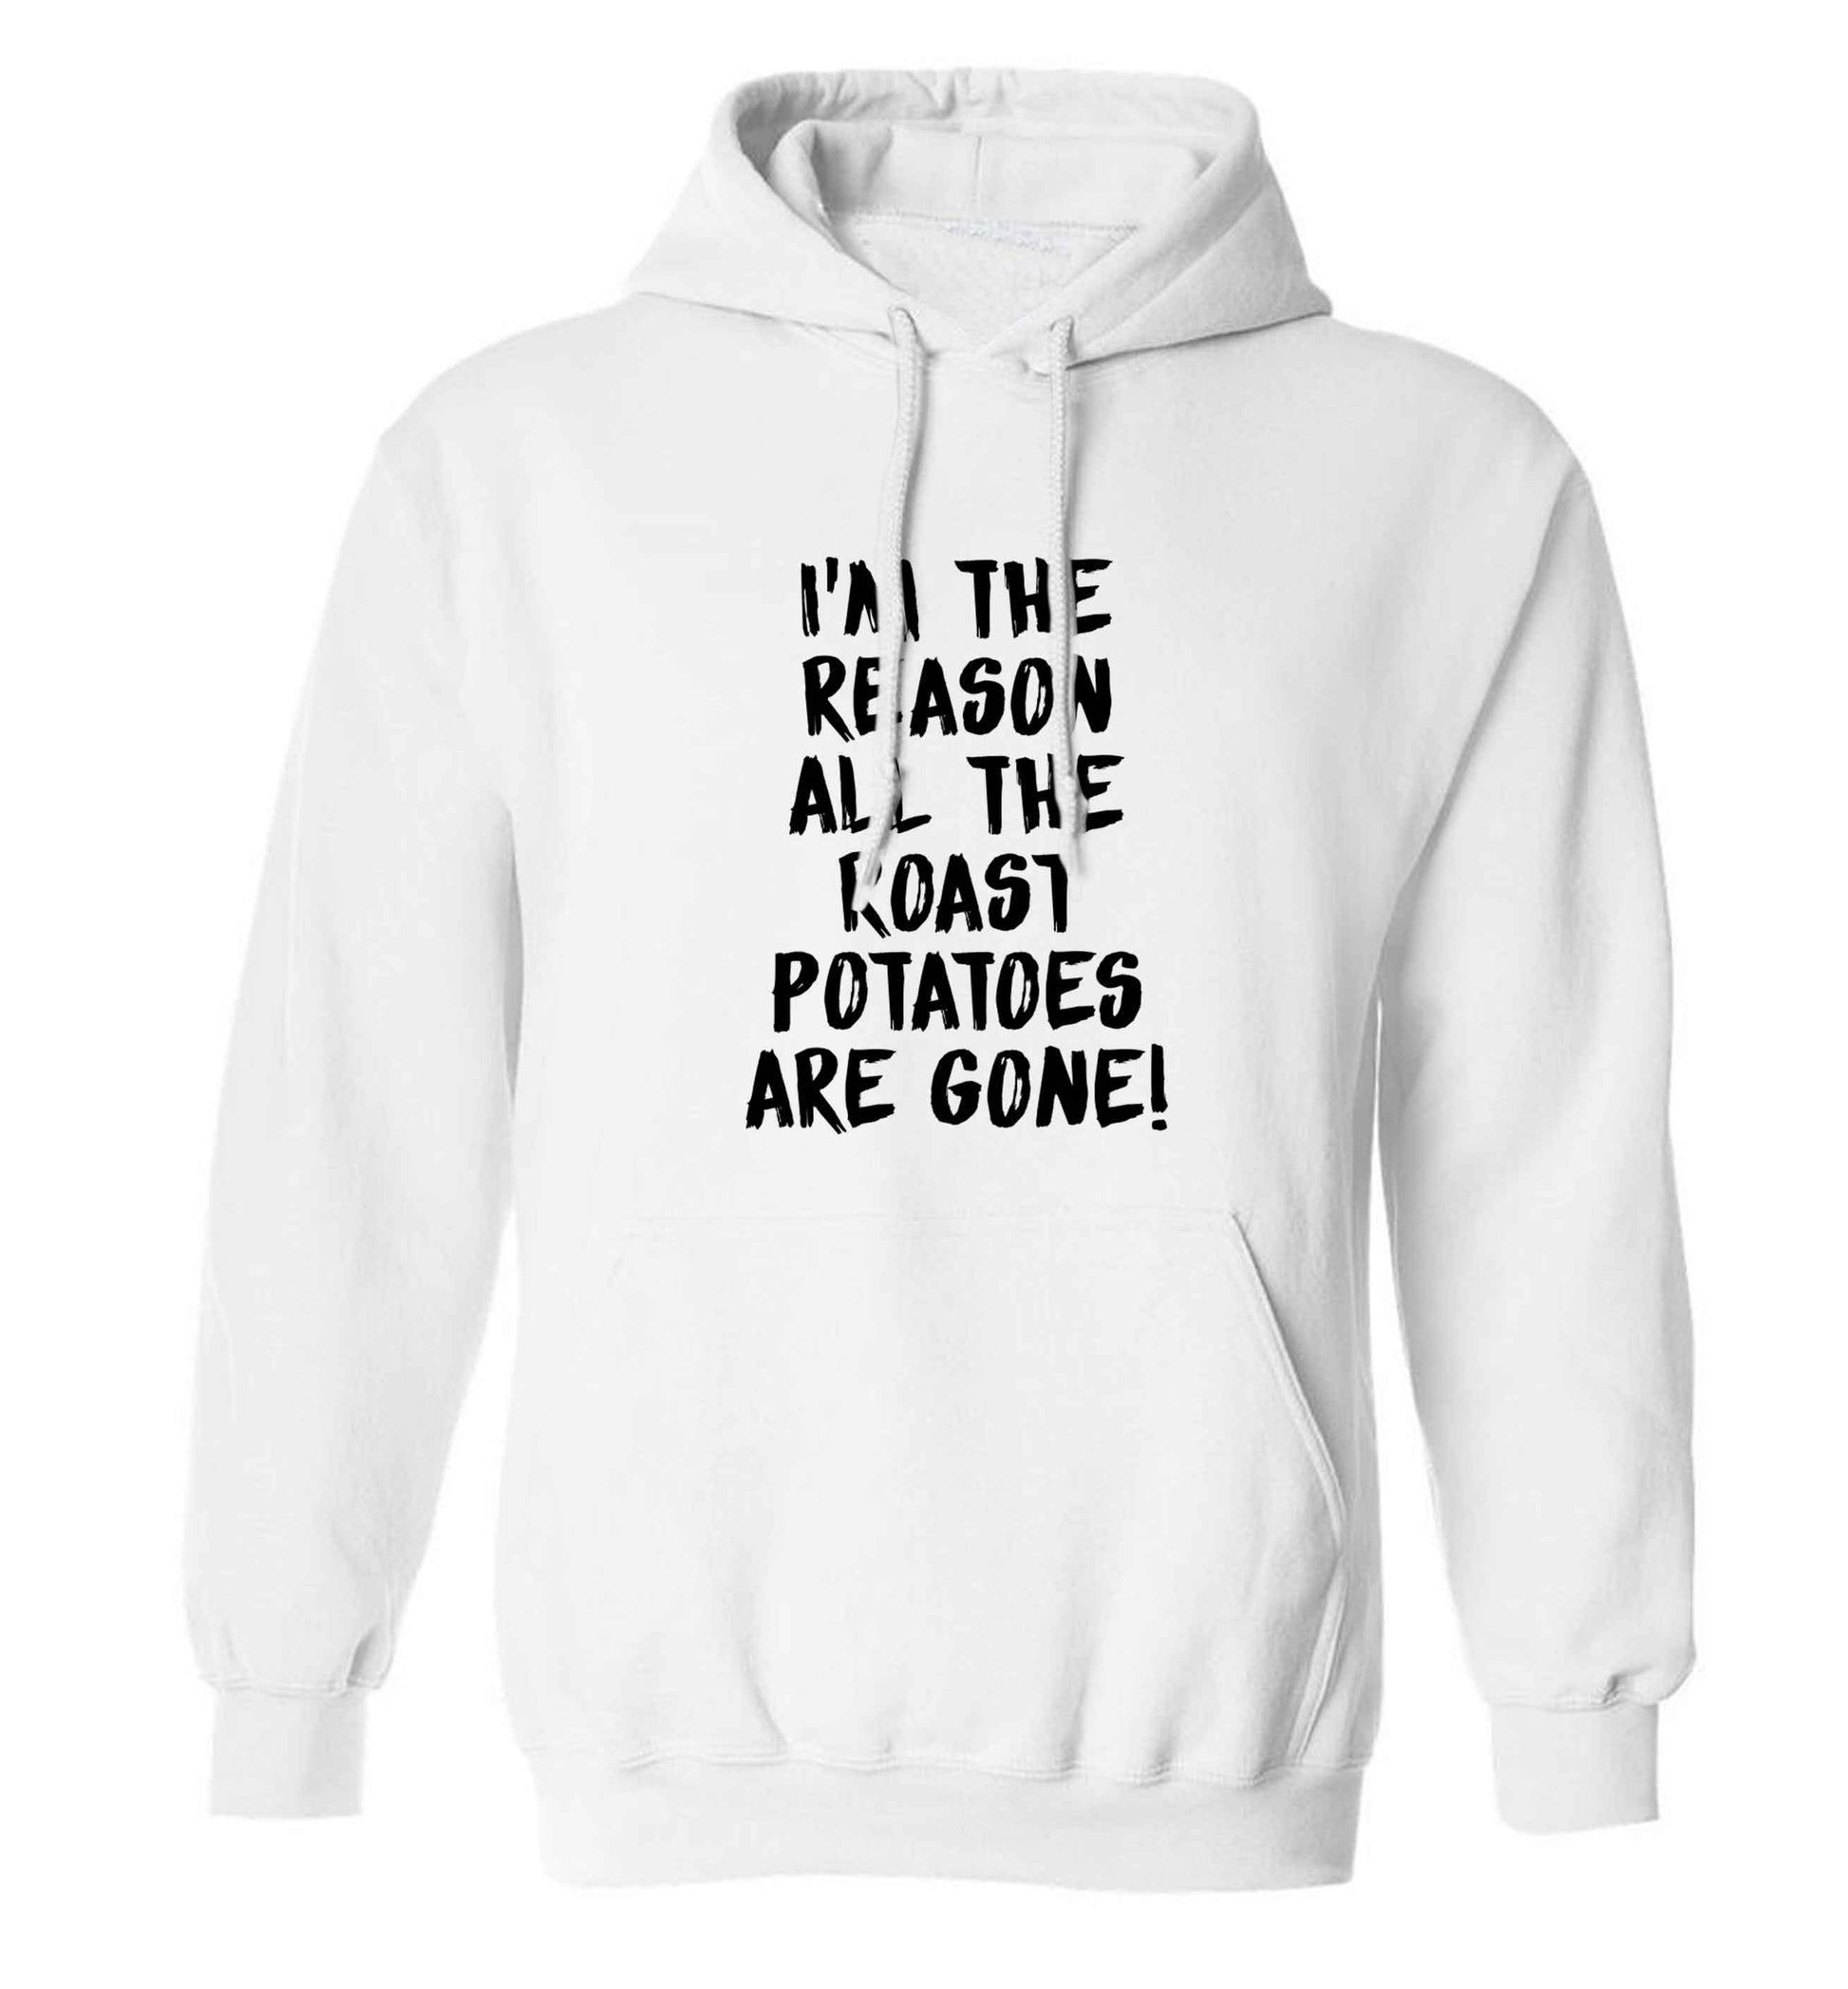 I'm the reason all the roast potatoes are gone adults unisex white hoodie 2XL